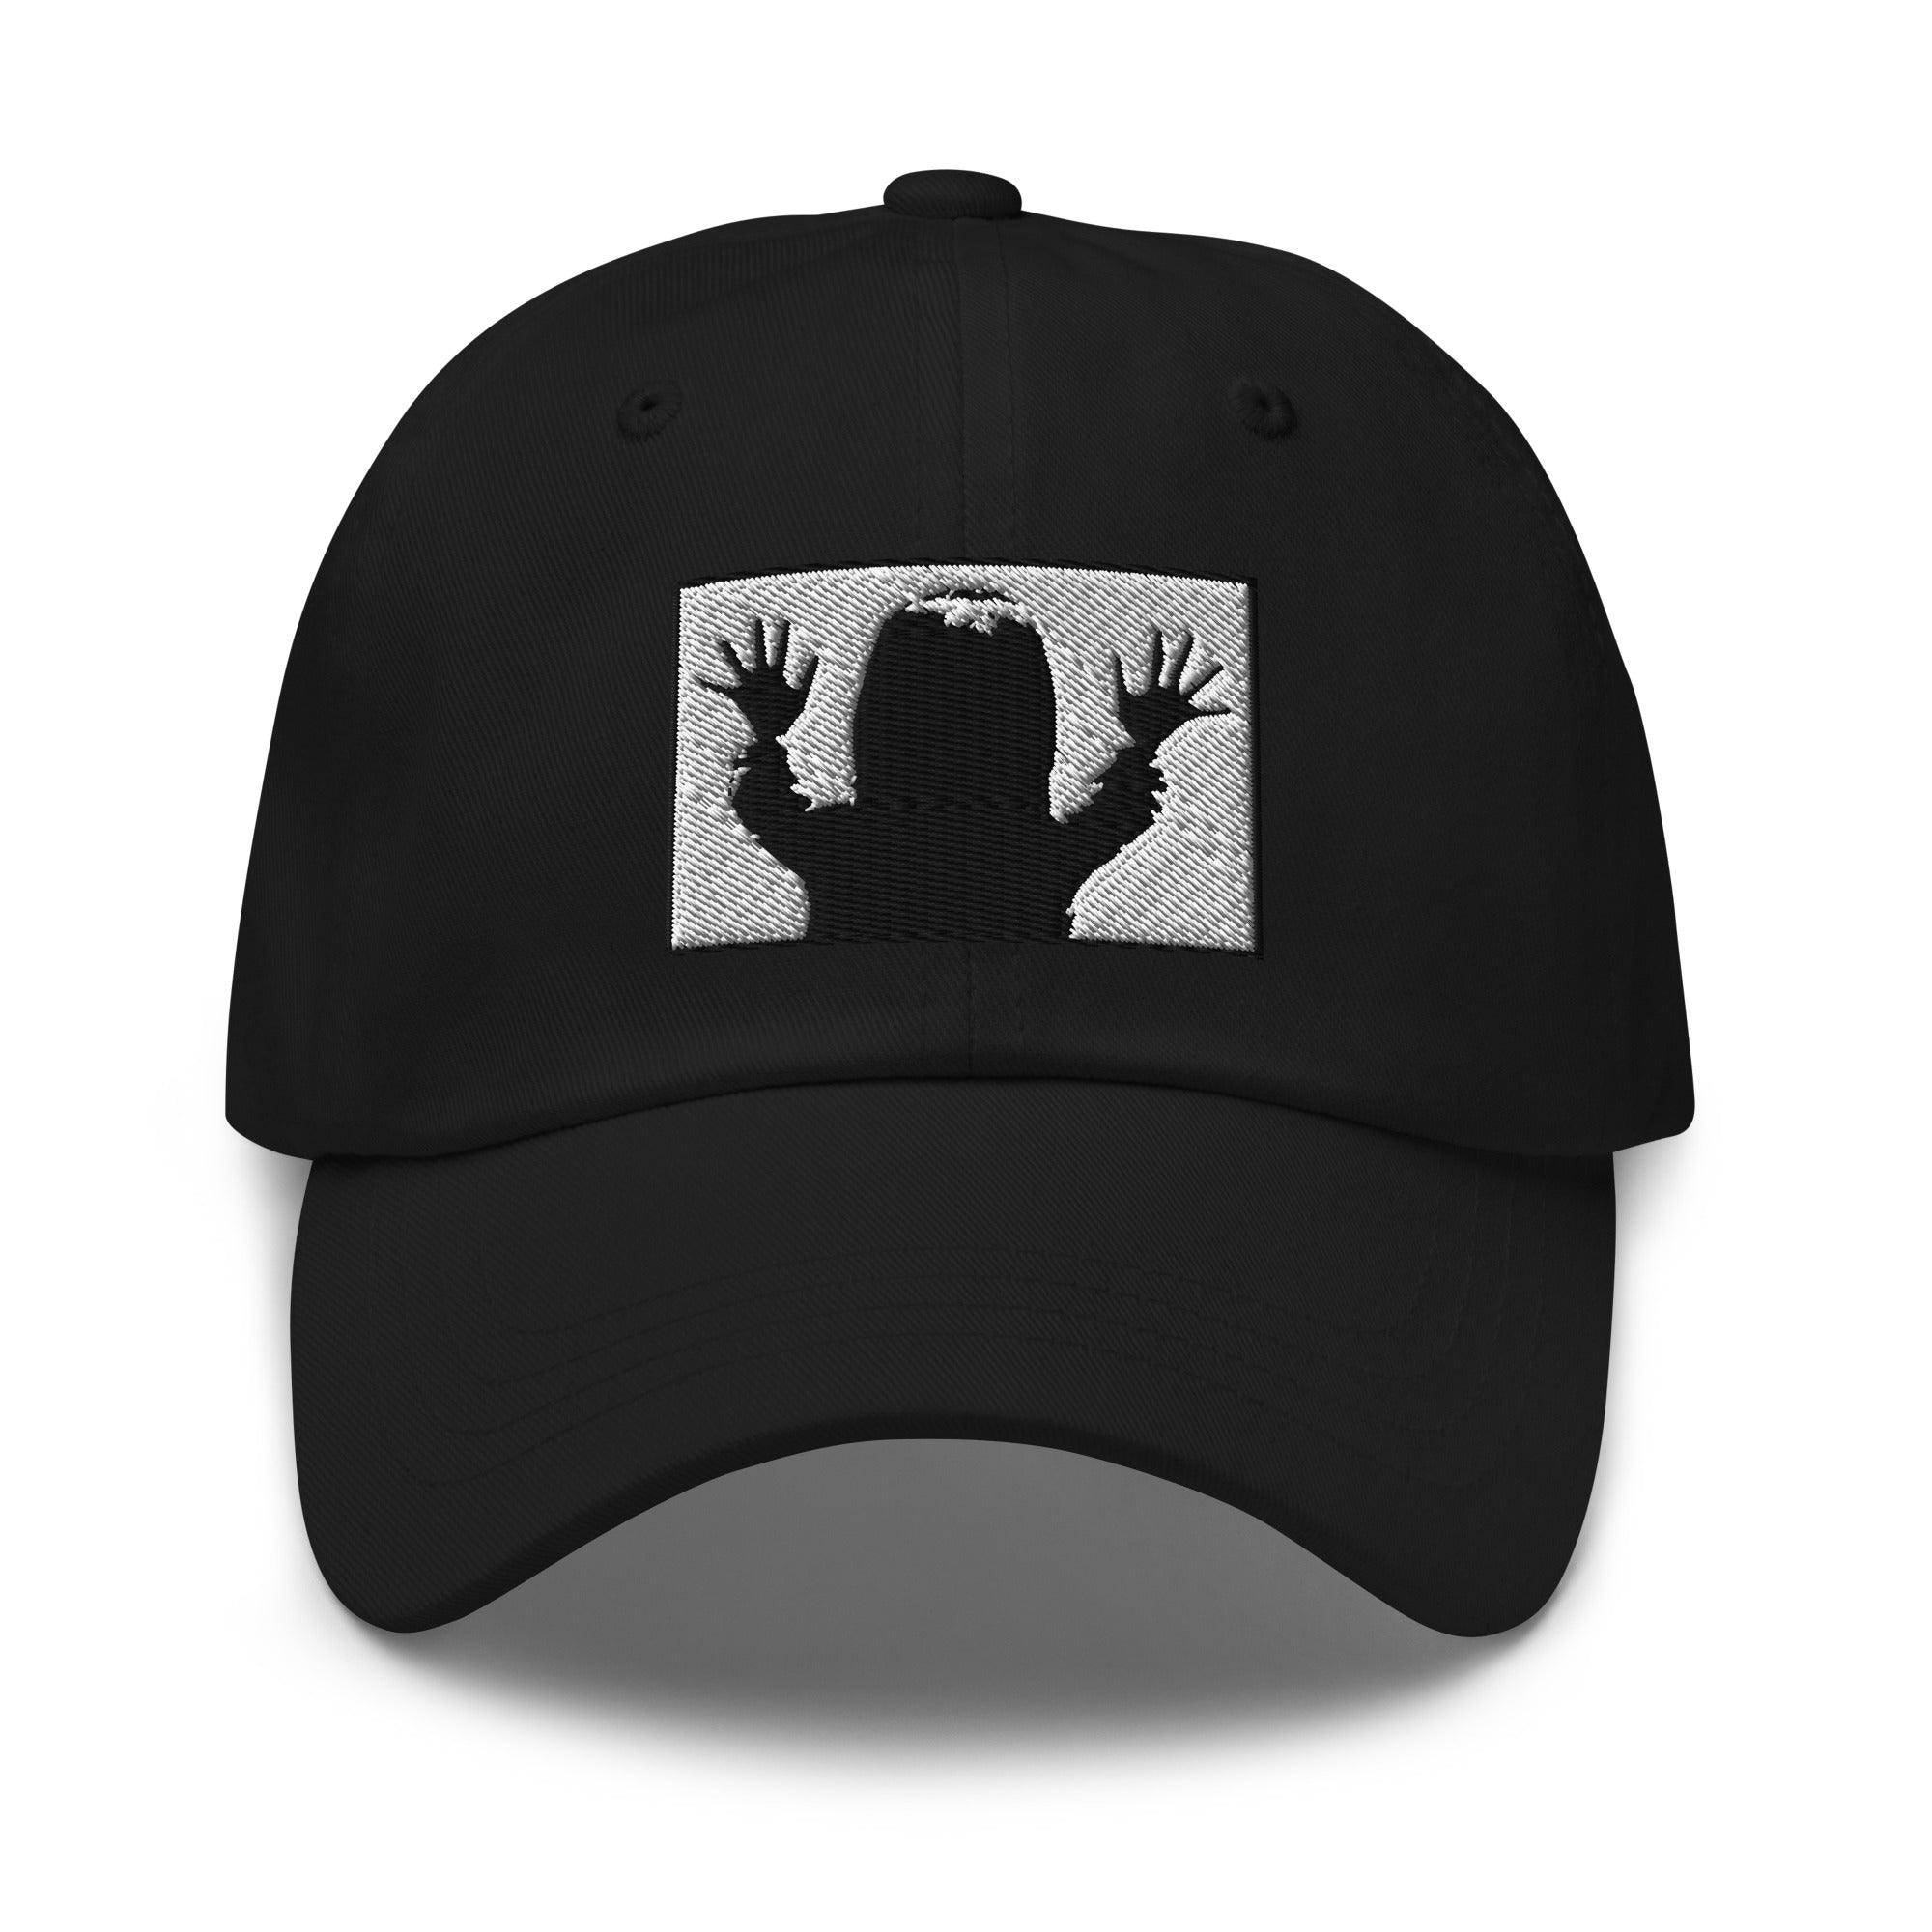 "They're Here" Carol Anne Poltergeist Embroidered Baseball Cap Horror Movie Dad hat - Edge of Life Designs